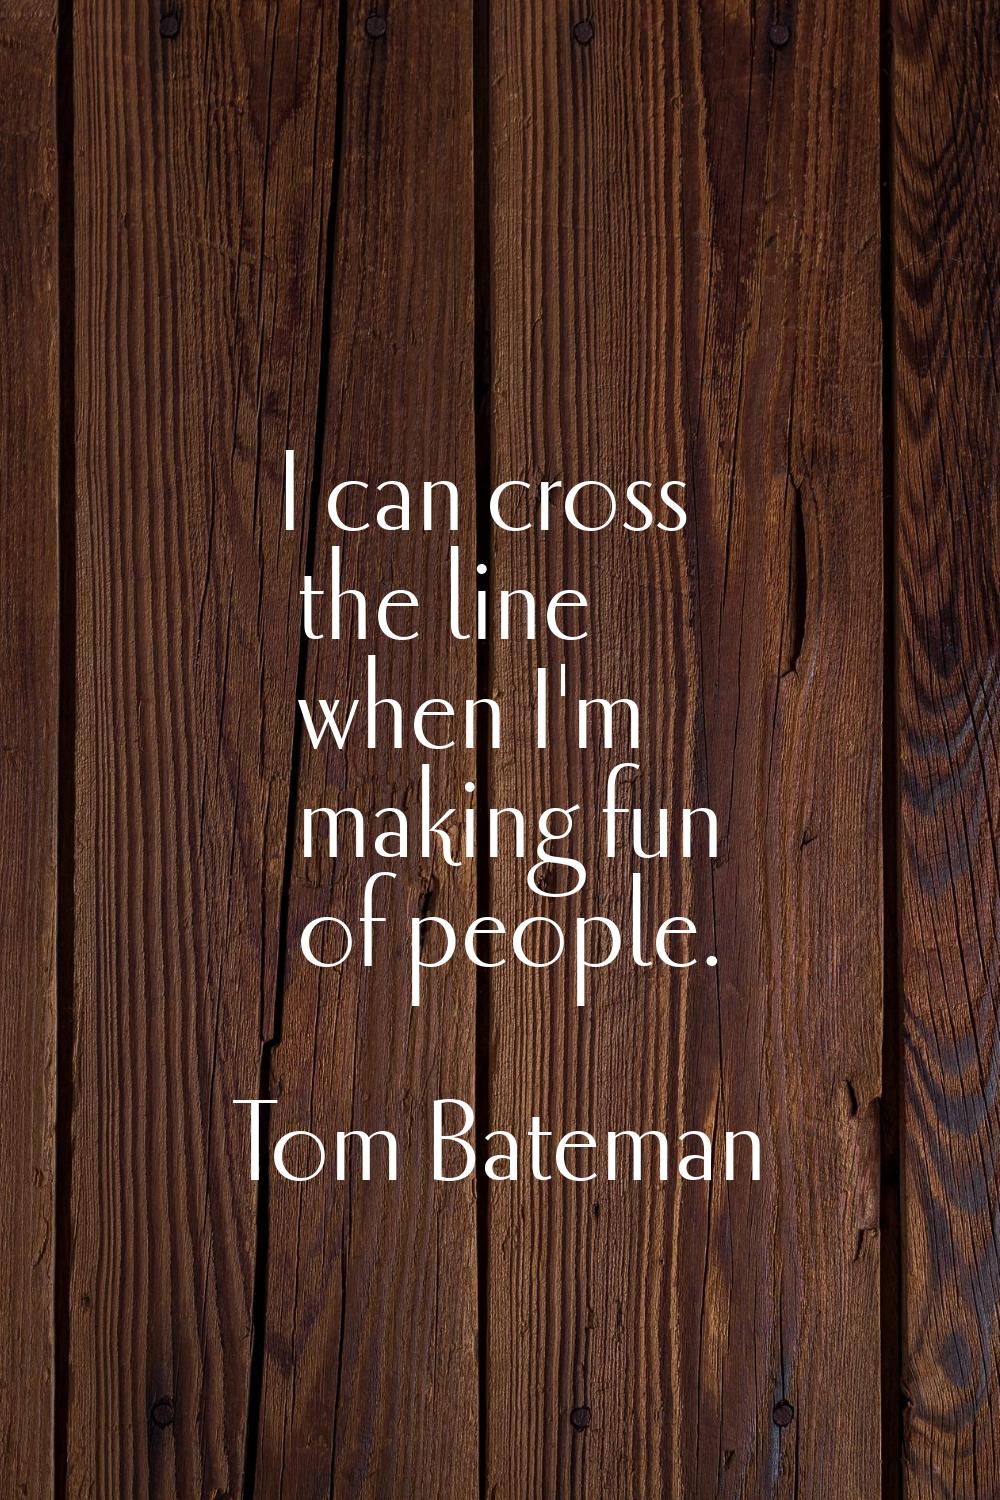 I can cross the line when I'm making fun of people.